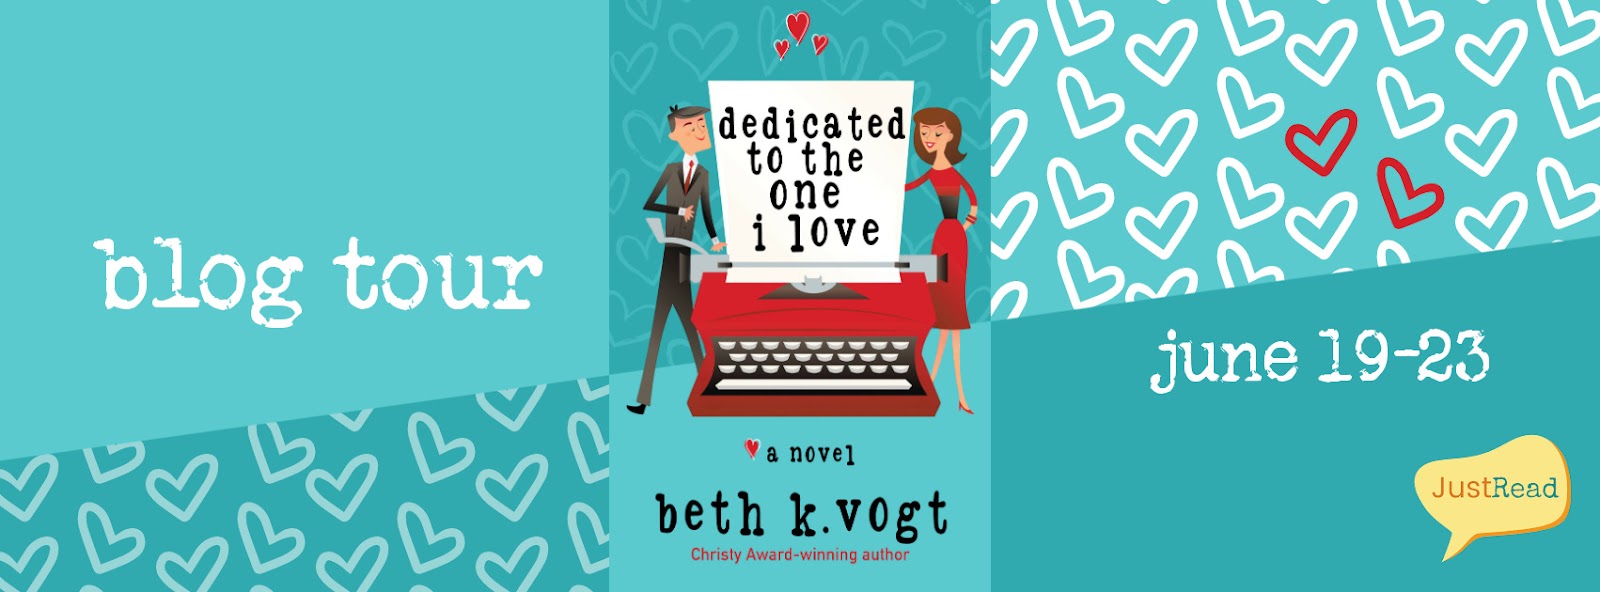 Dedicated to the One I Love JustRead Blog Tour